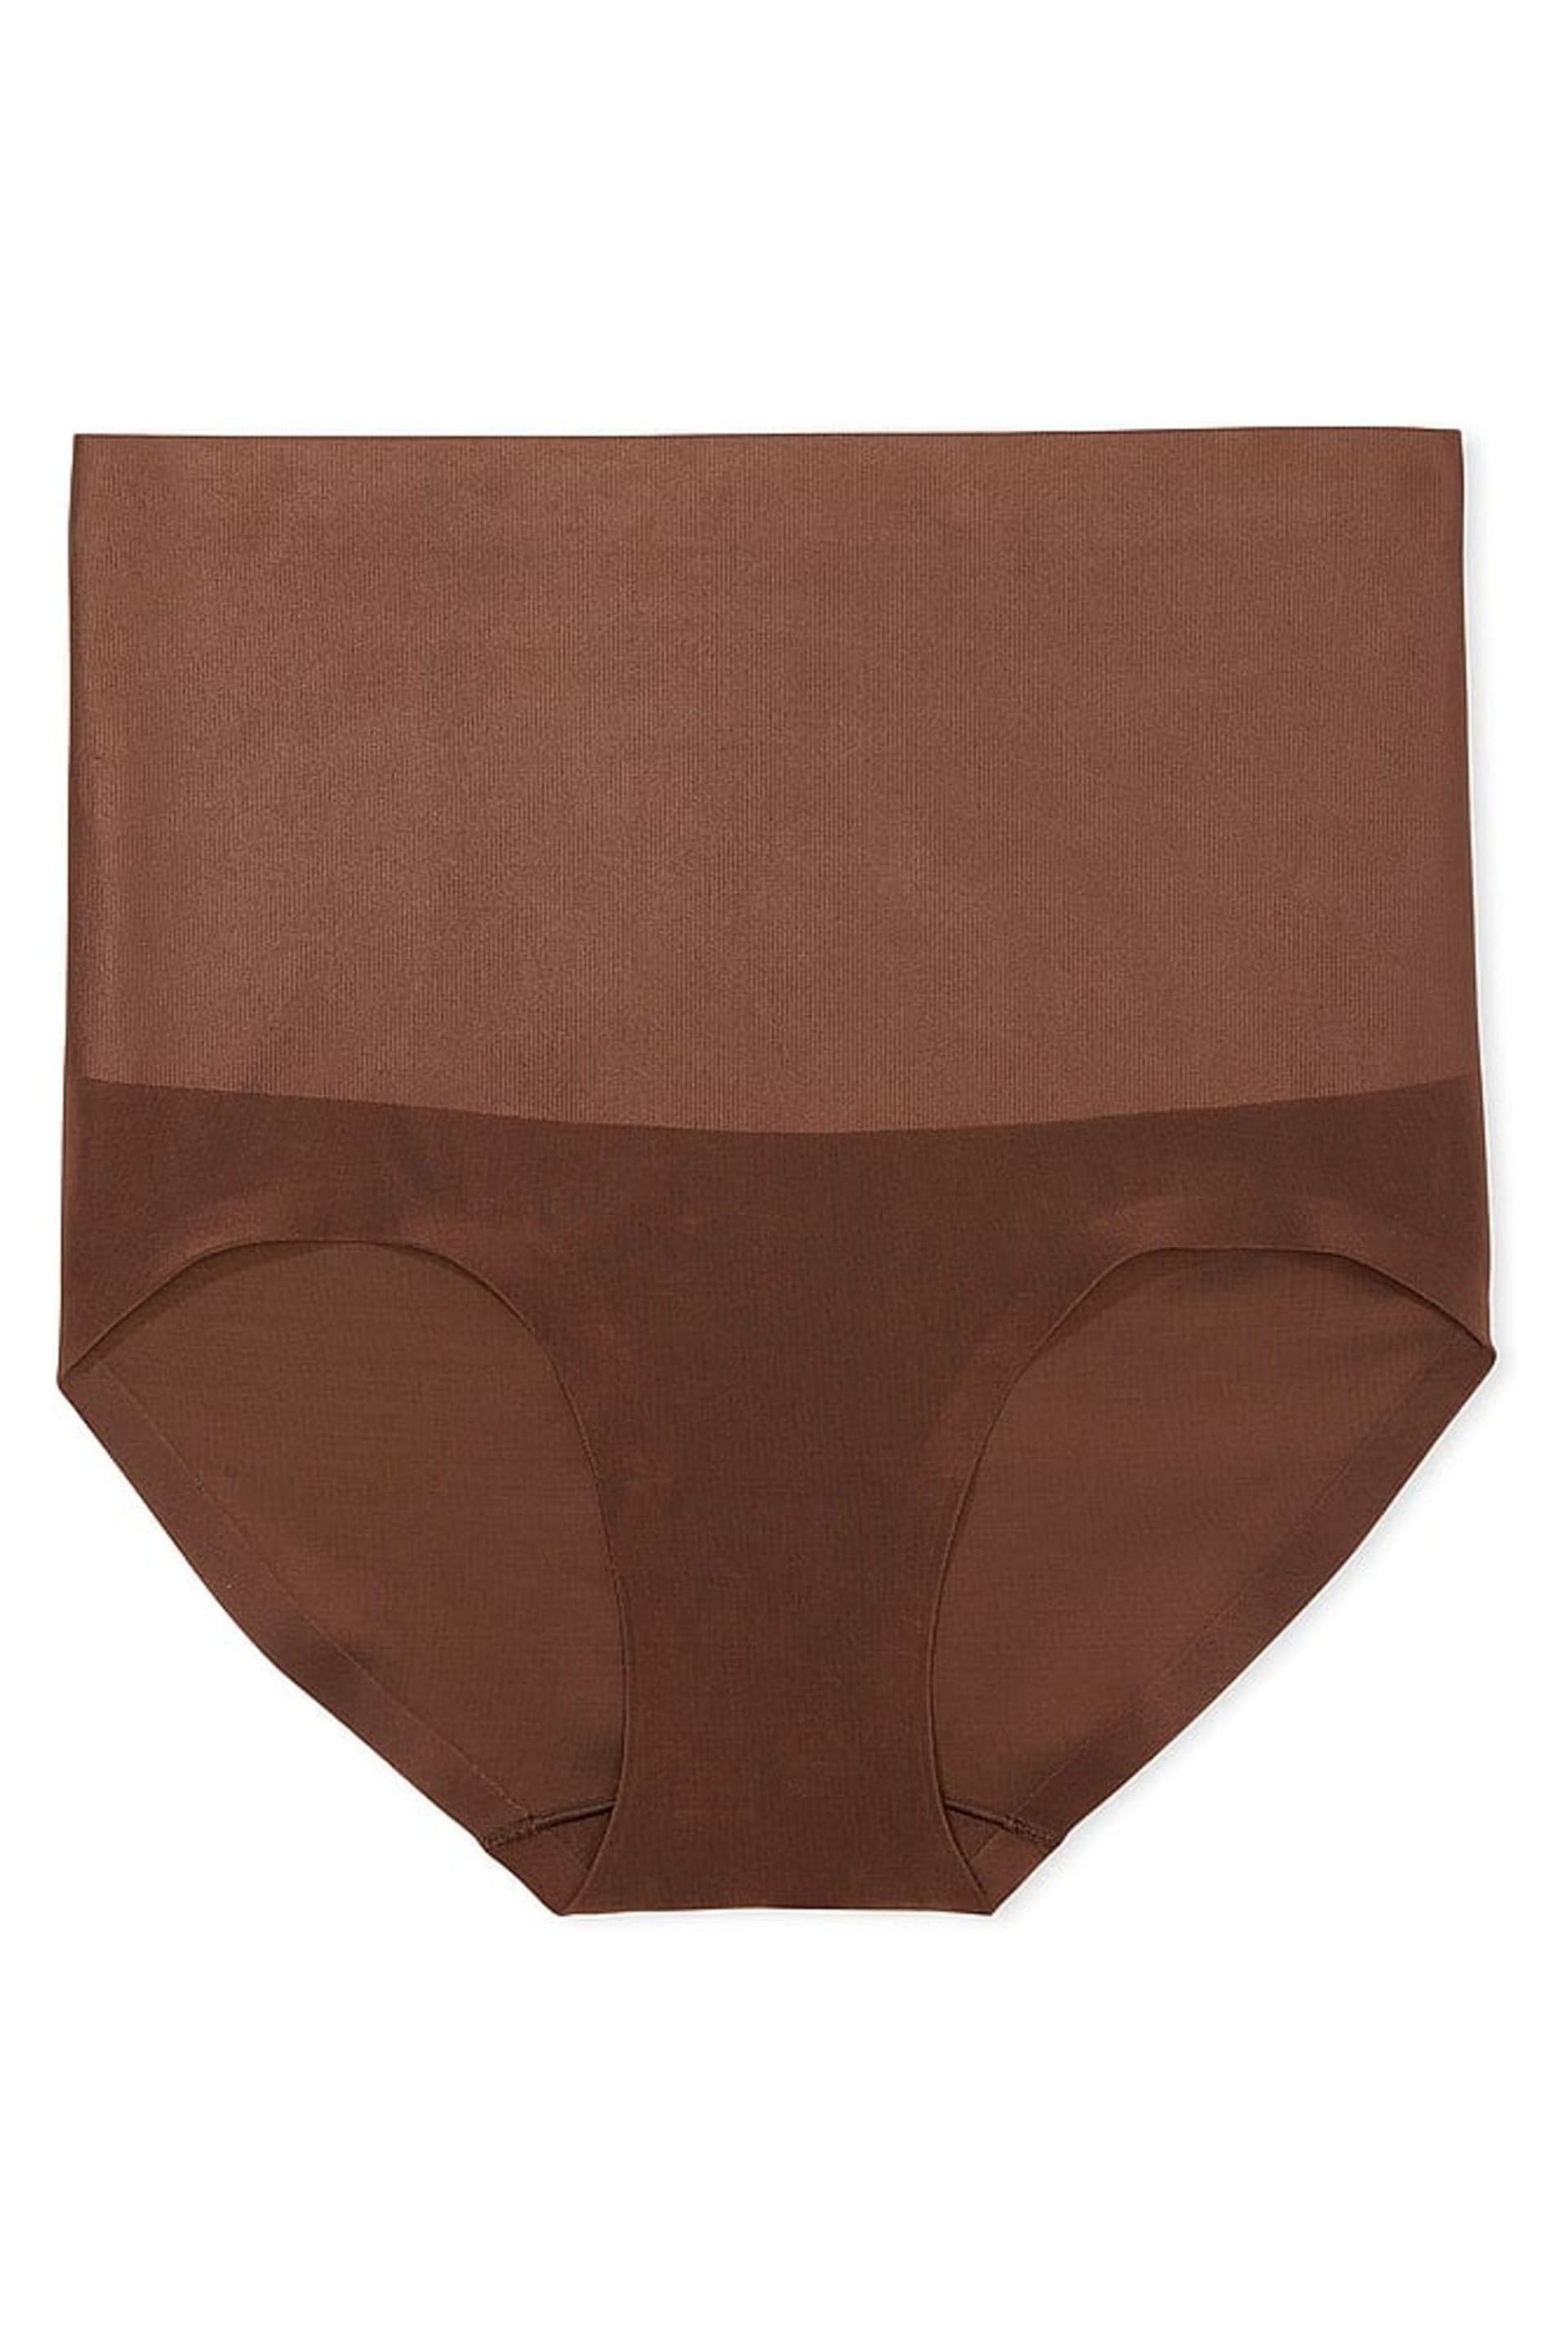 Victoria's Secret Ganache Brown Smooth Brief Shaping Knickers - Image 3 of 4